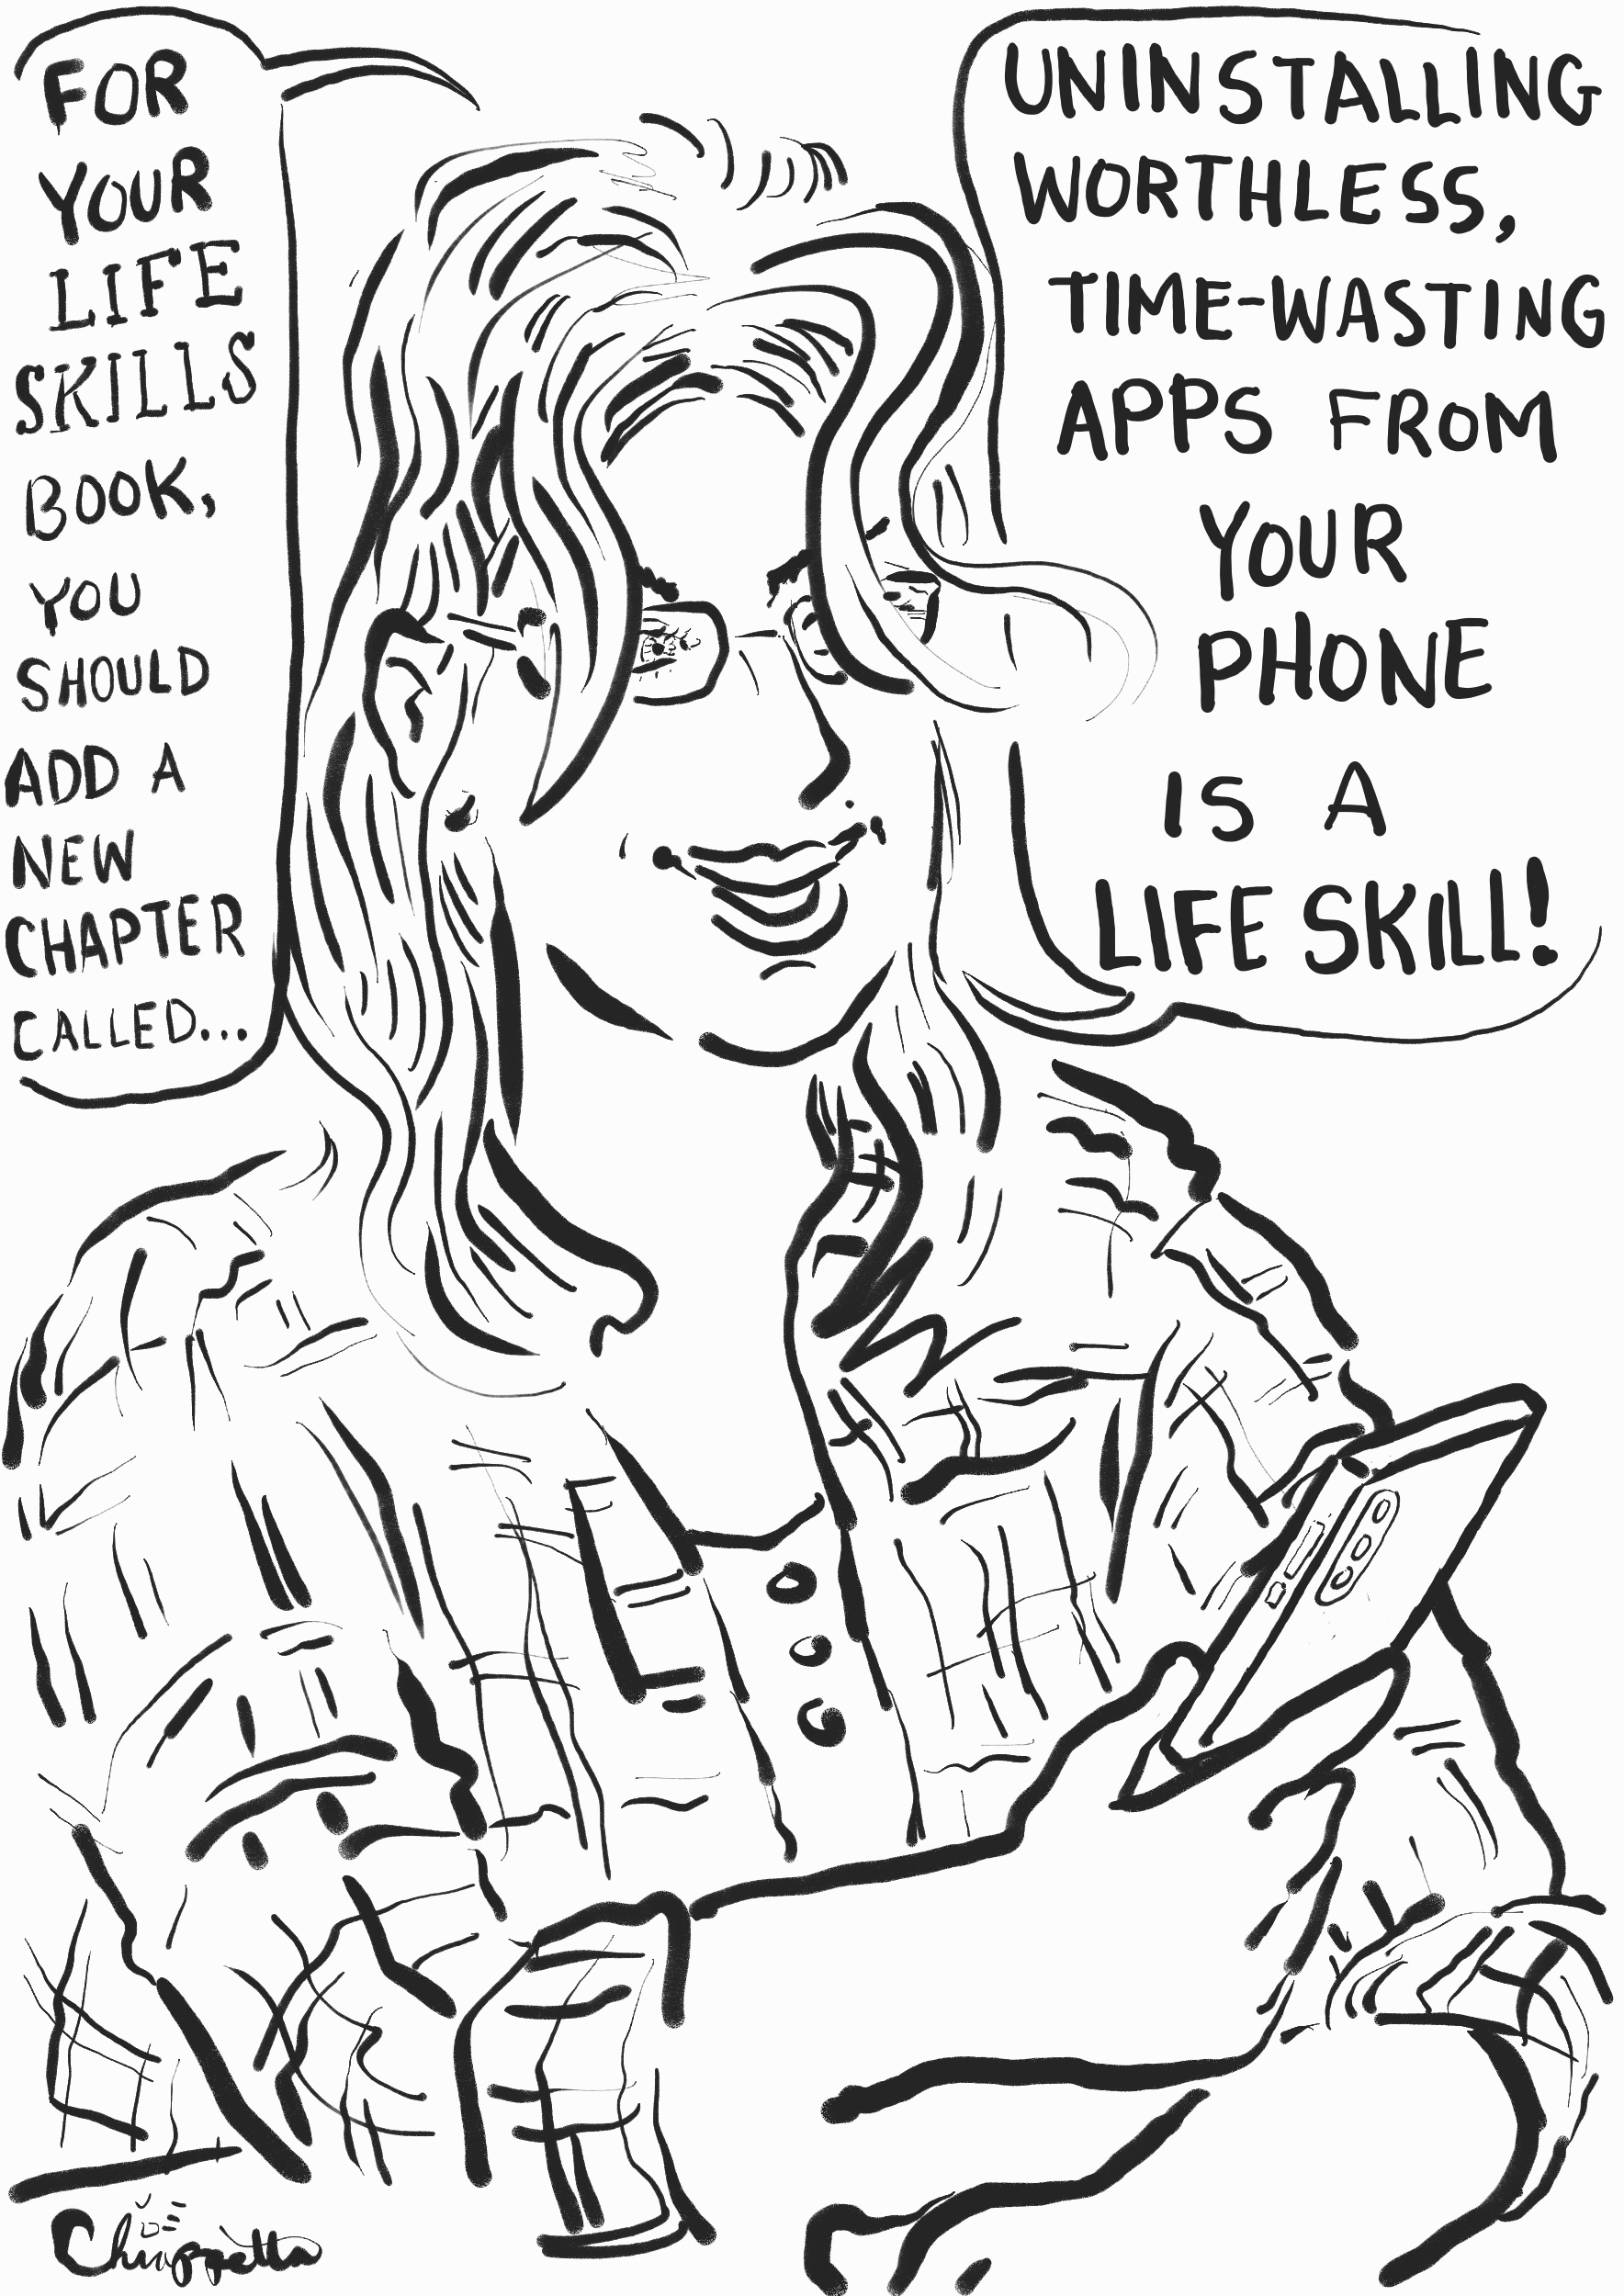 New Chapter for Life Skills Book is rare digital art by Joe Chiappetta